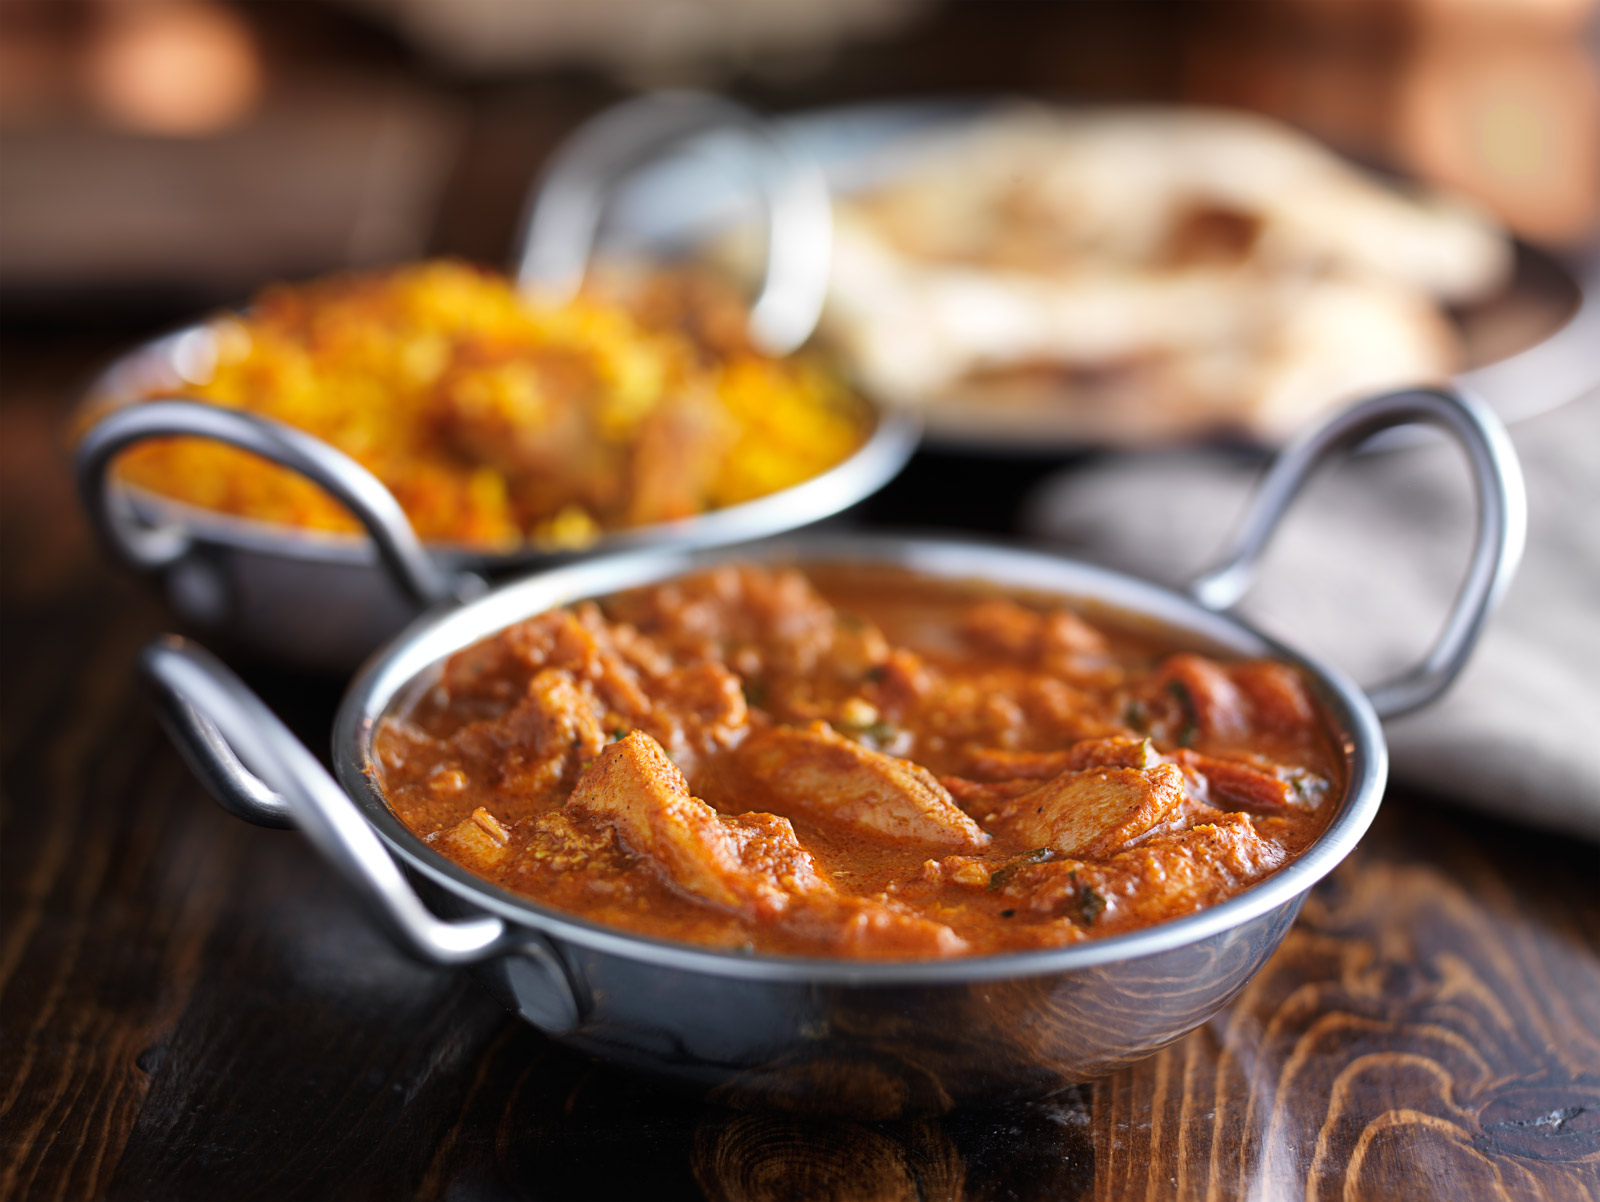 Butter Chicken must-try Indian dishes originally from Old Delhi in 1950s